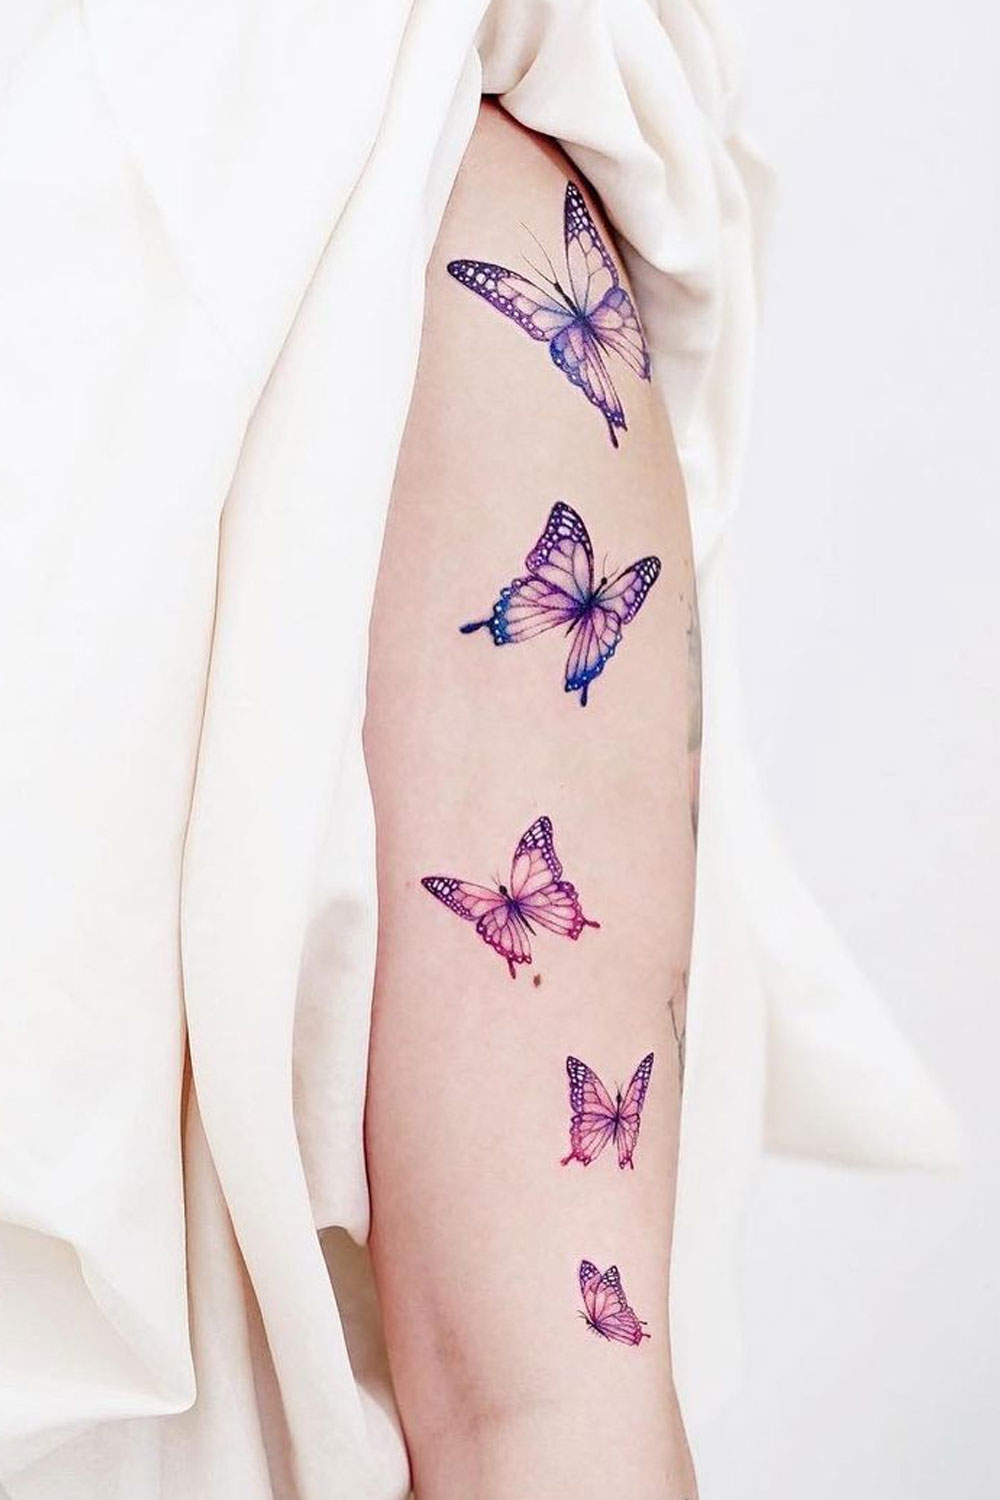 Purple and Pink Butterflies Tattoos for Arm